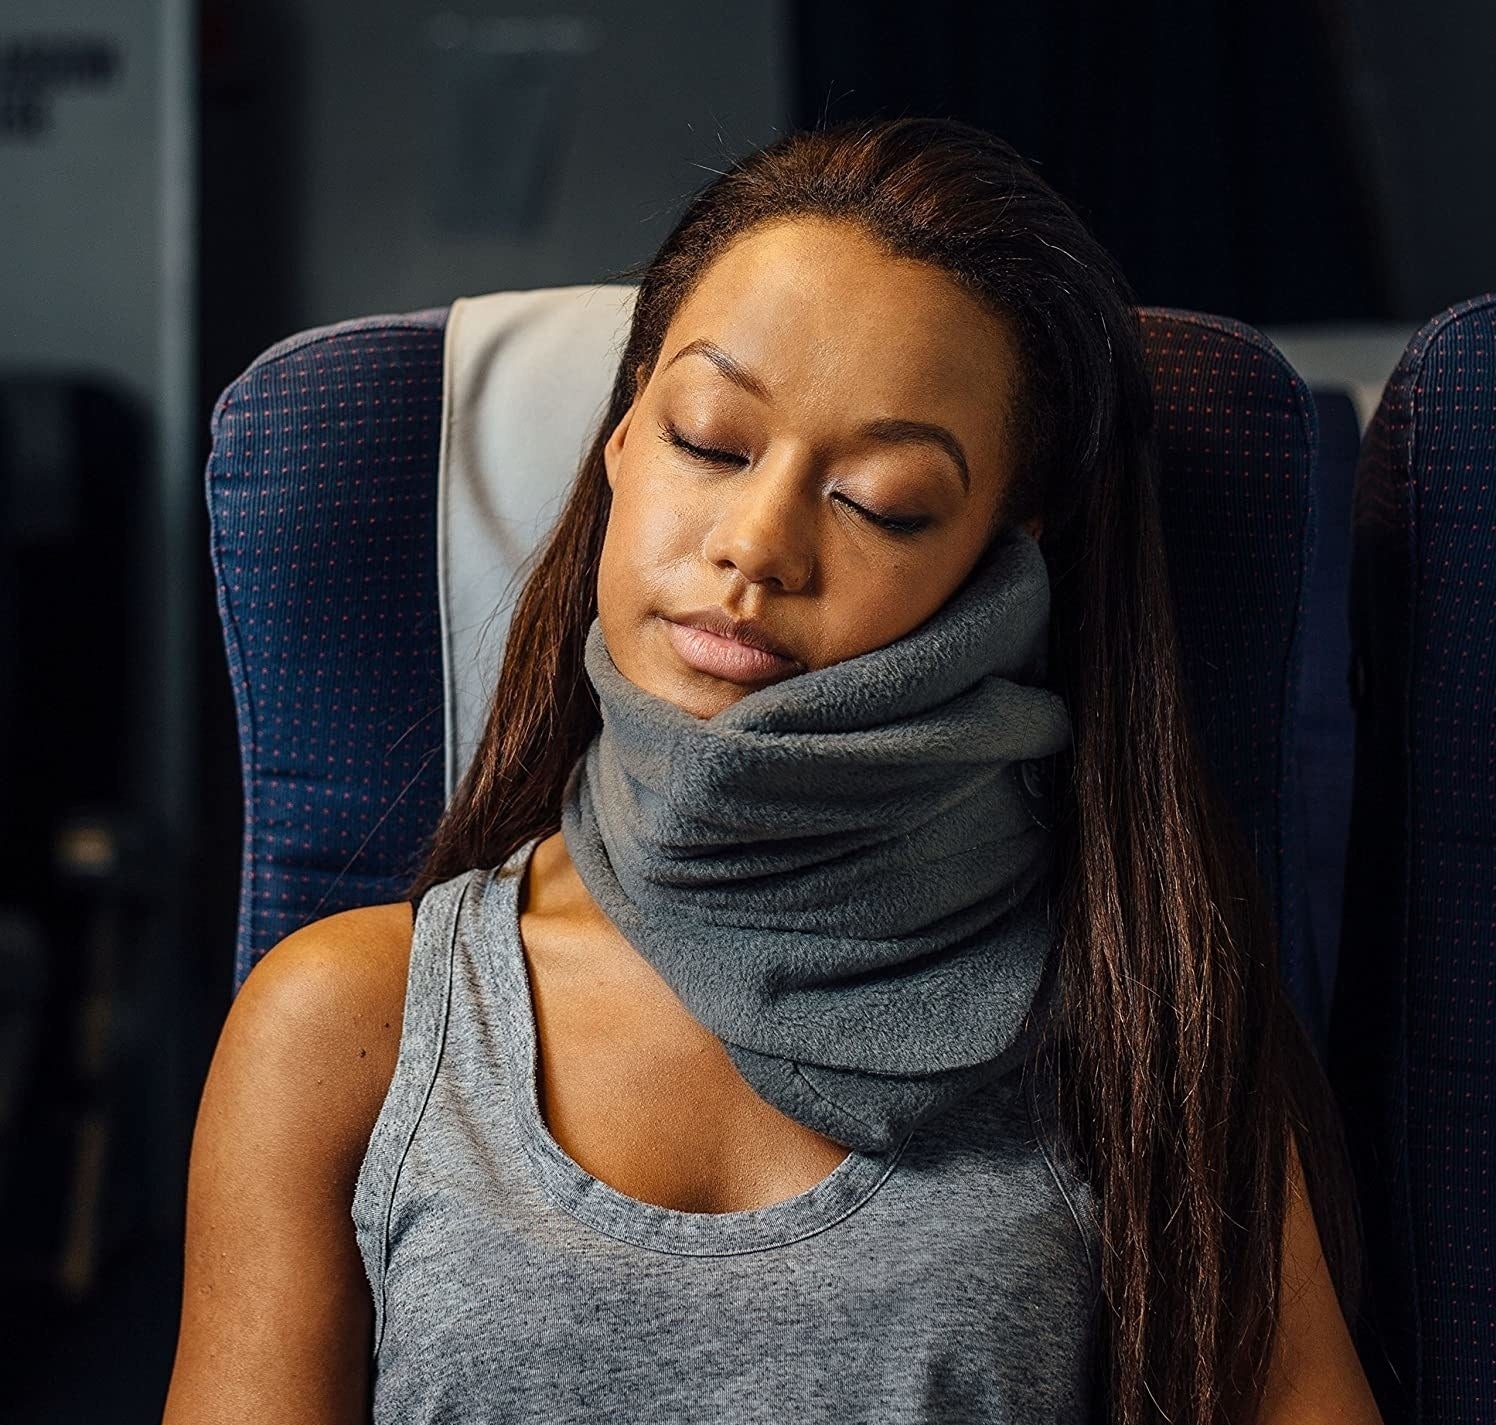 model using the gray Trtl travel pillow on a plane